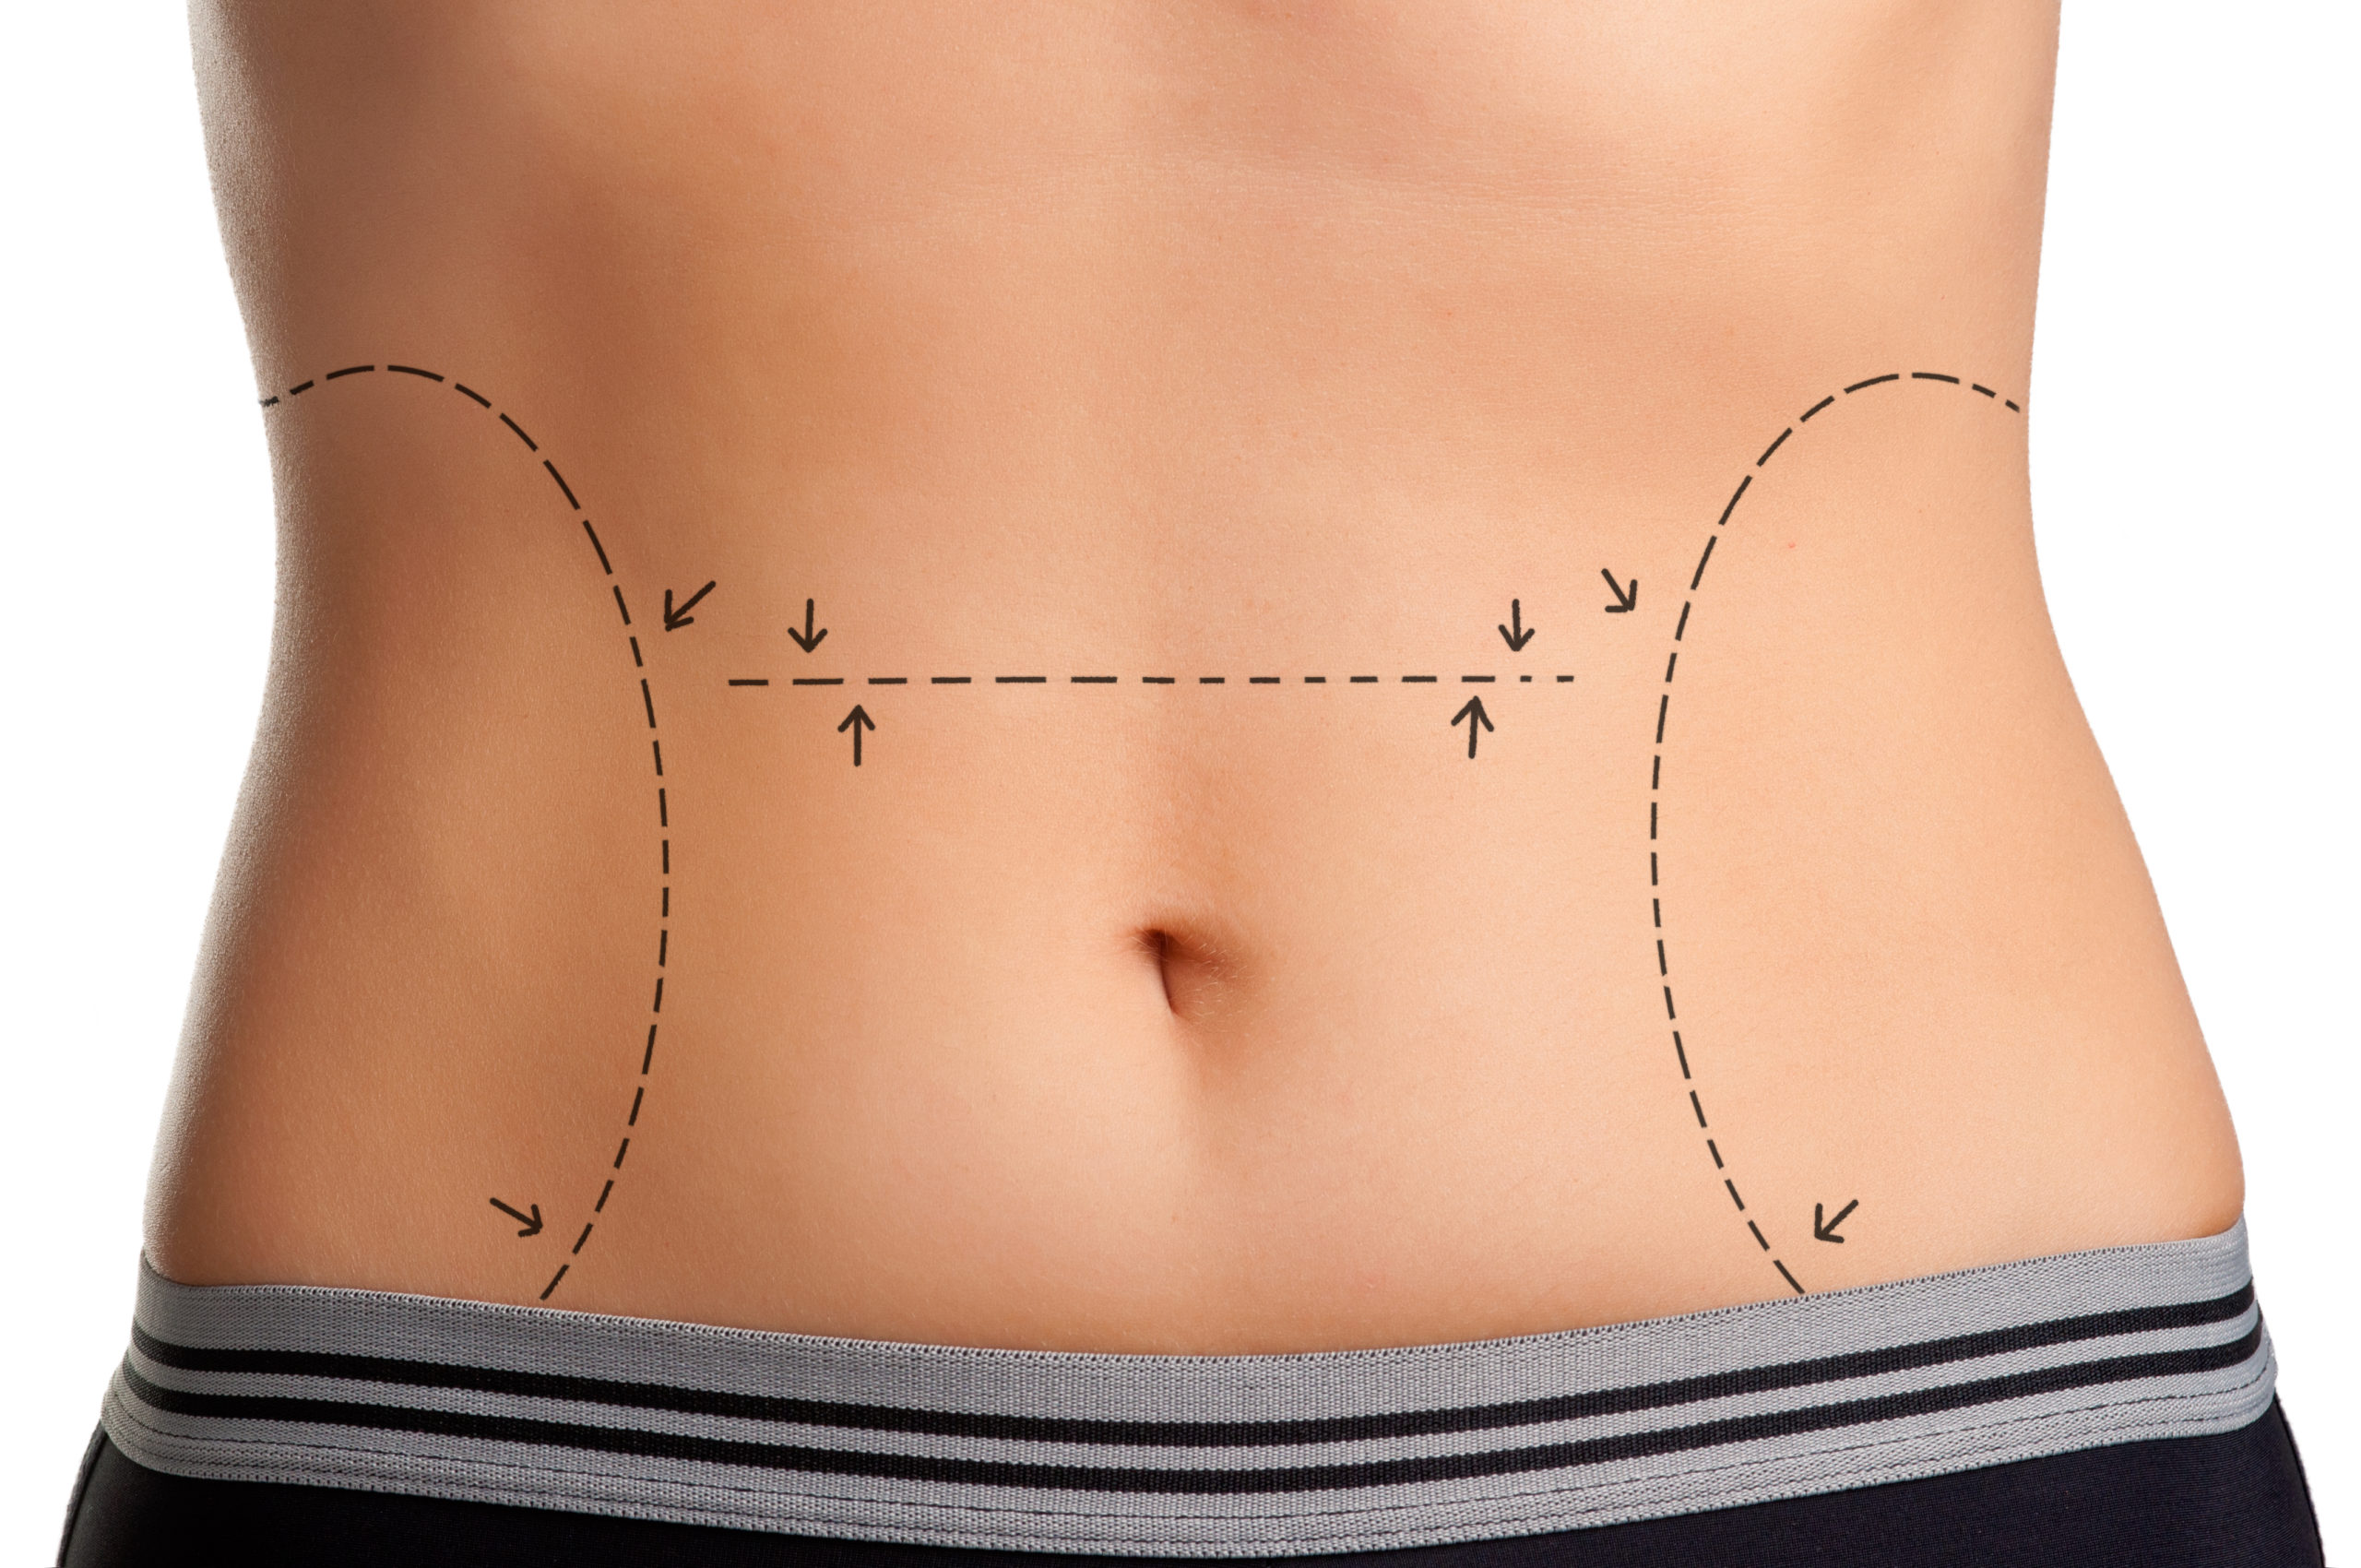 Does a Tummy Tuck Remove Stretch Marks?